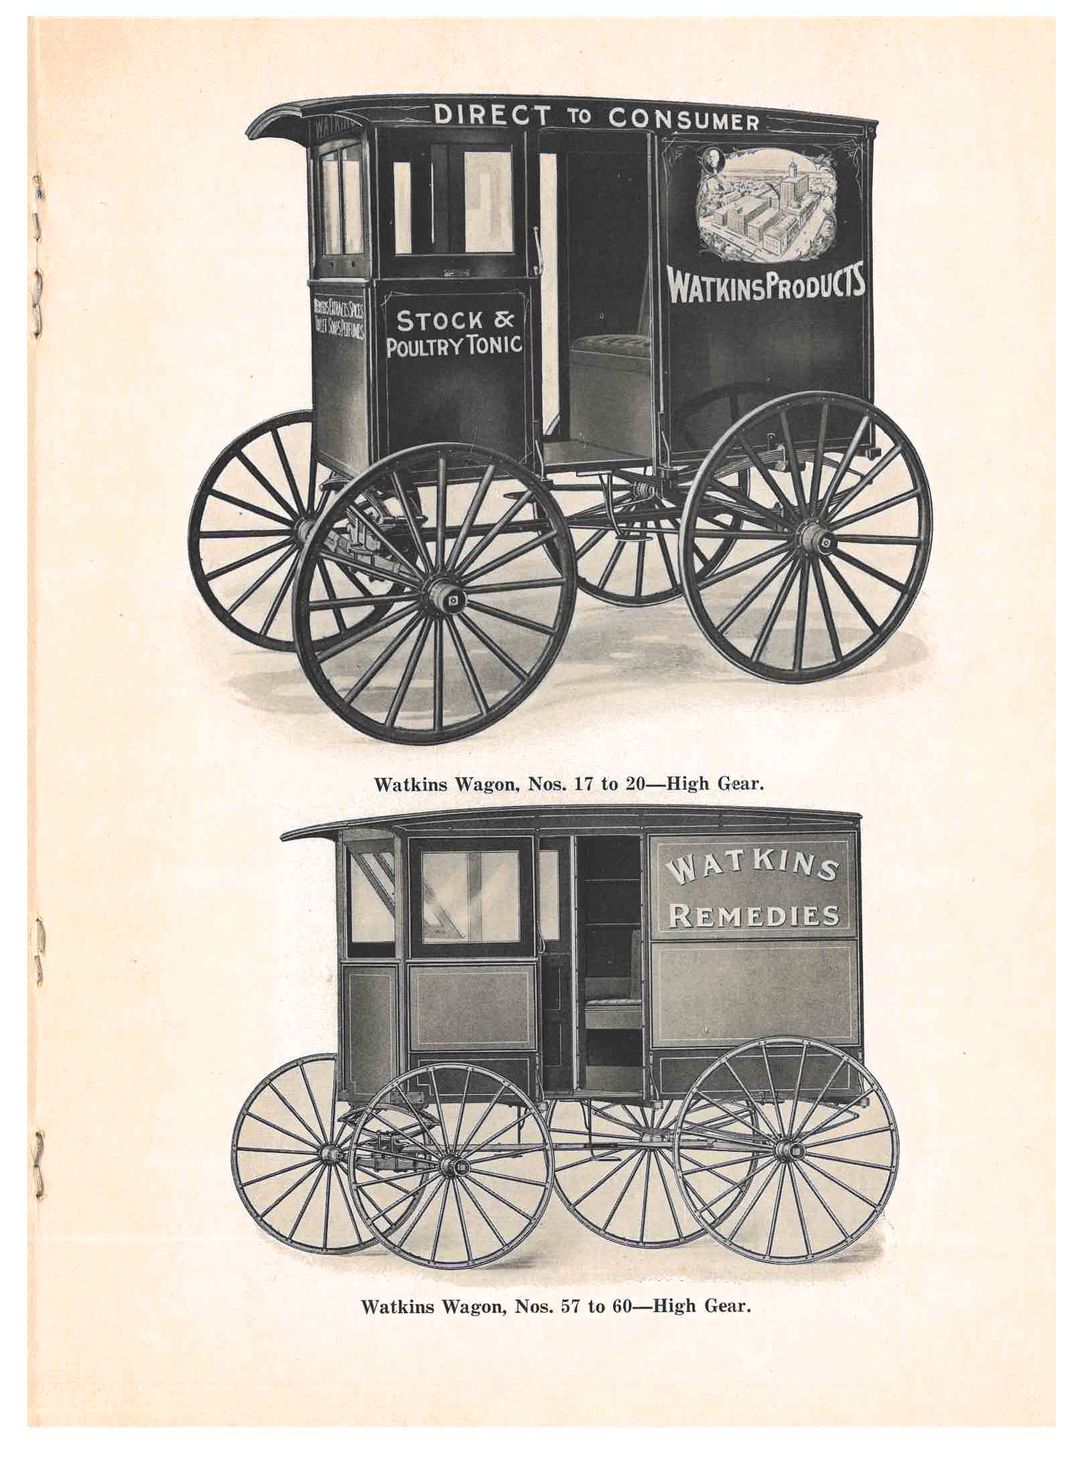 Turn of the 20th century illustration of two wagons